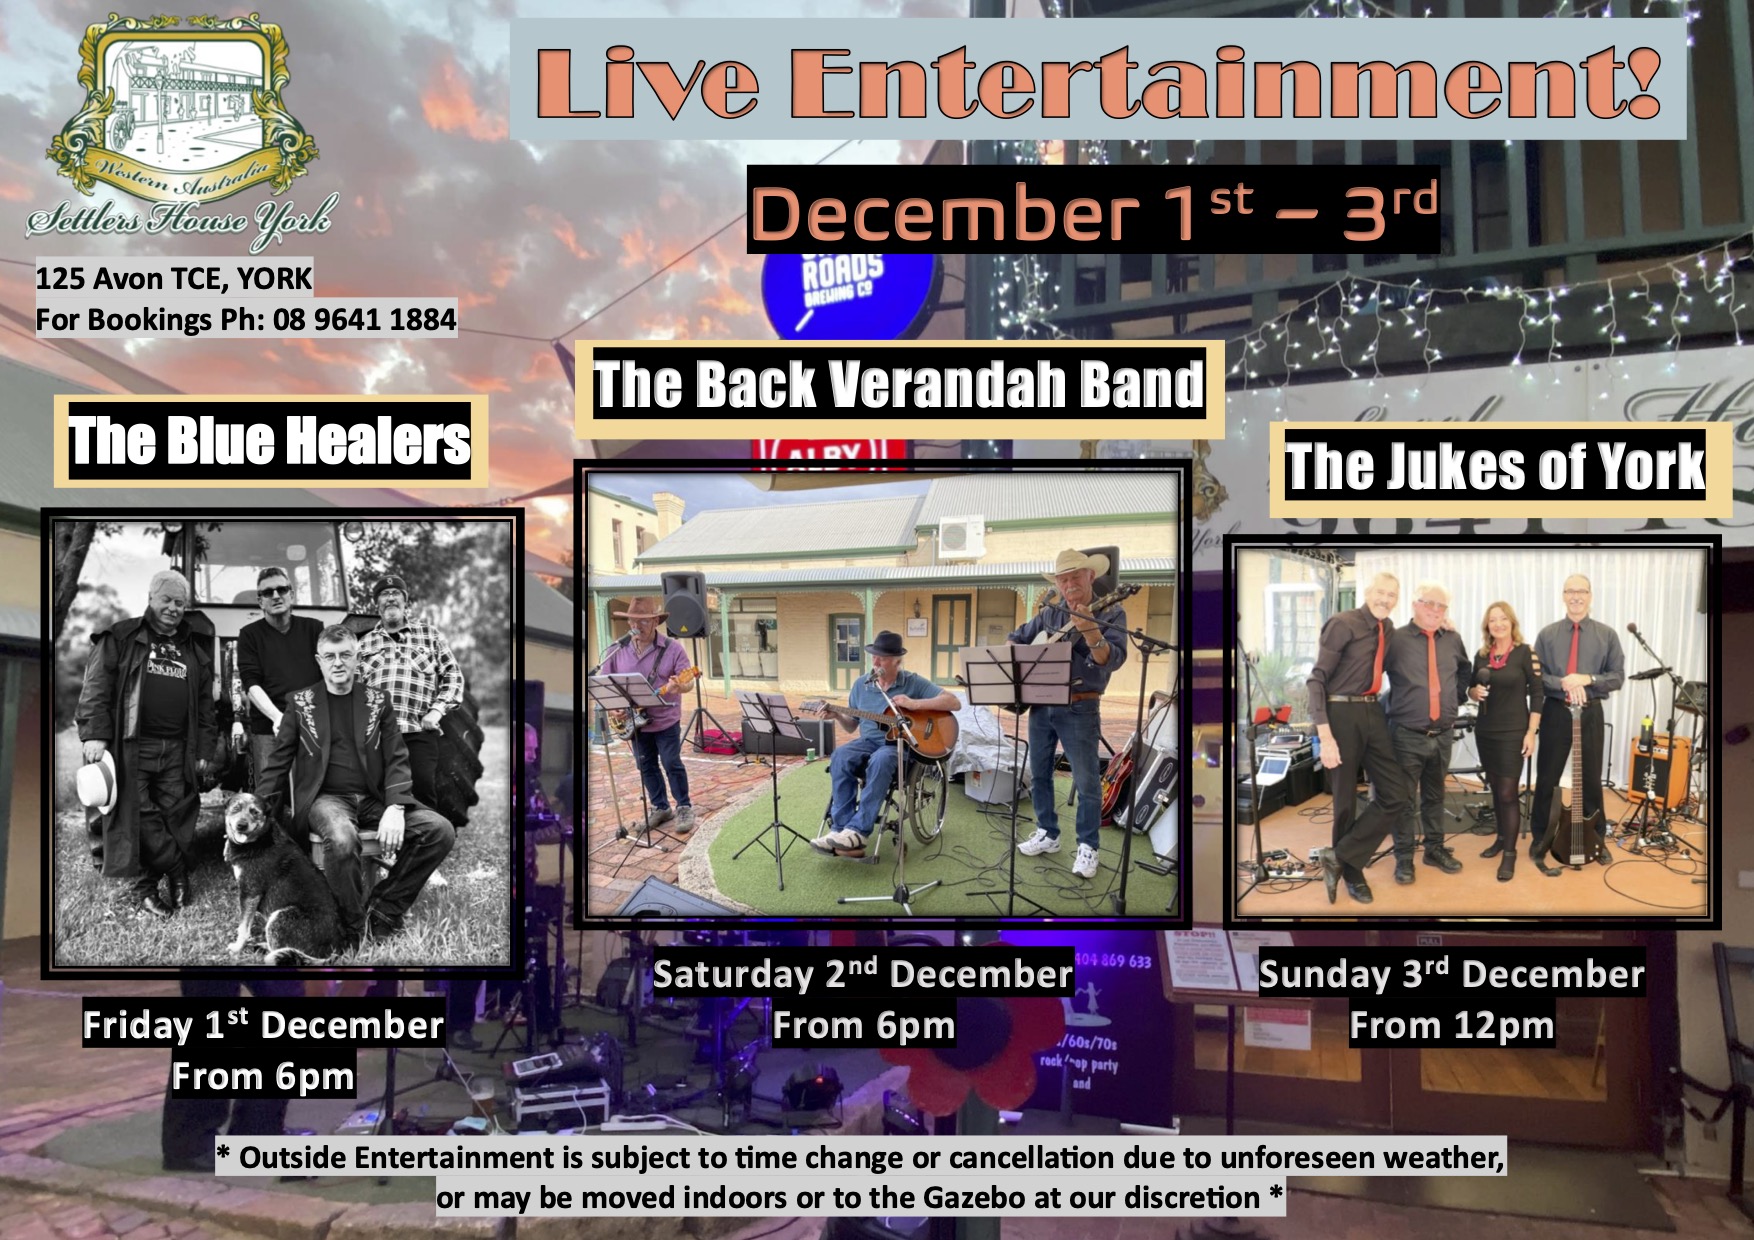 Live Entertainment at Settlers House - December 1st to 3rd